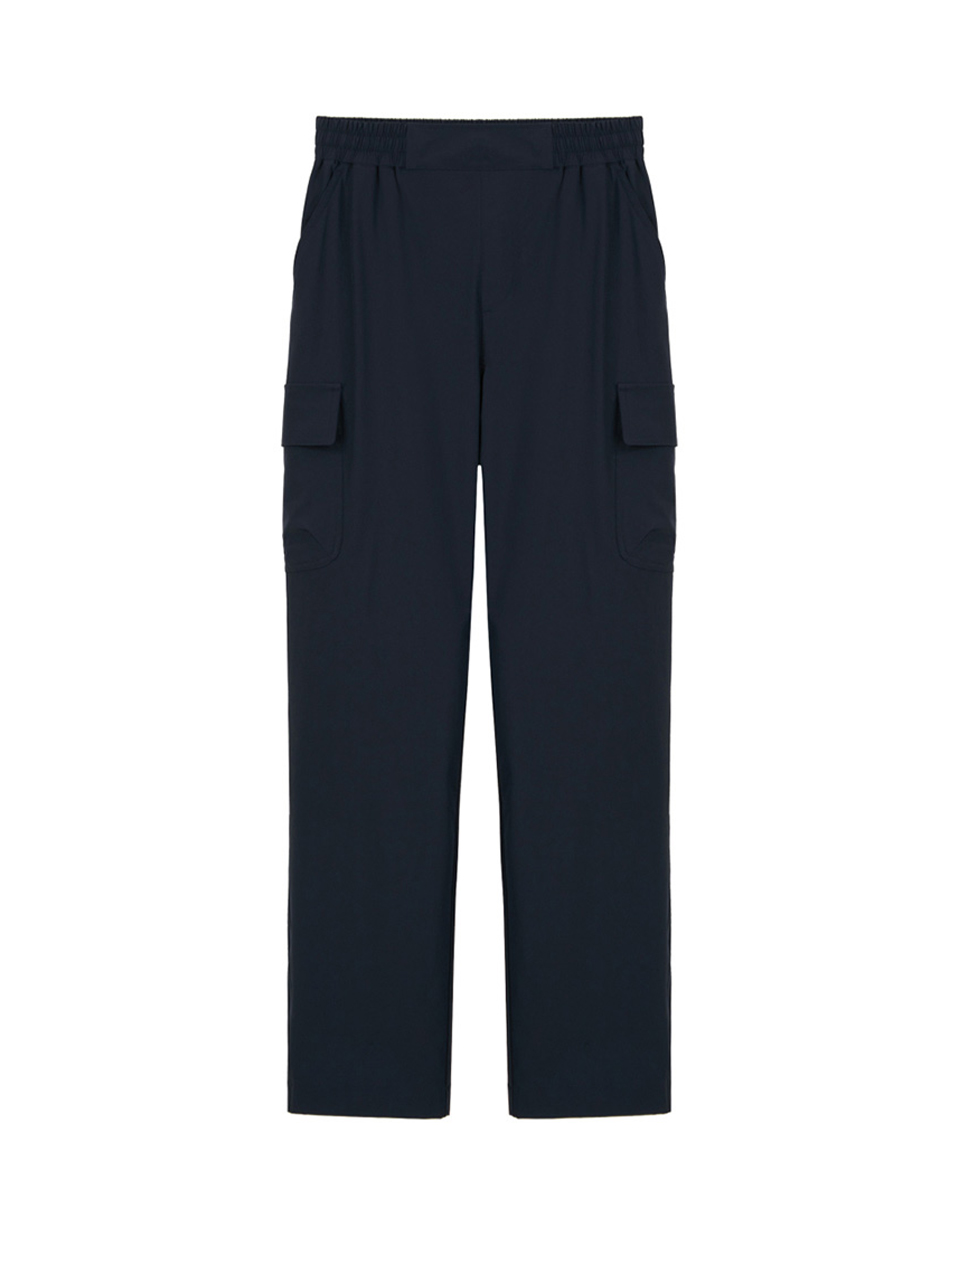 [LIMITED] SUMMER STRETCH SOLID COOL PANTS (FOR WOMAN) - SOFT NAVY